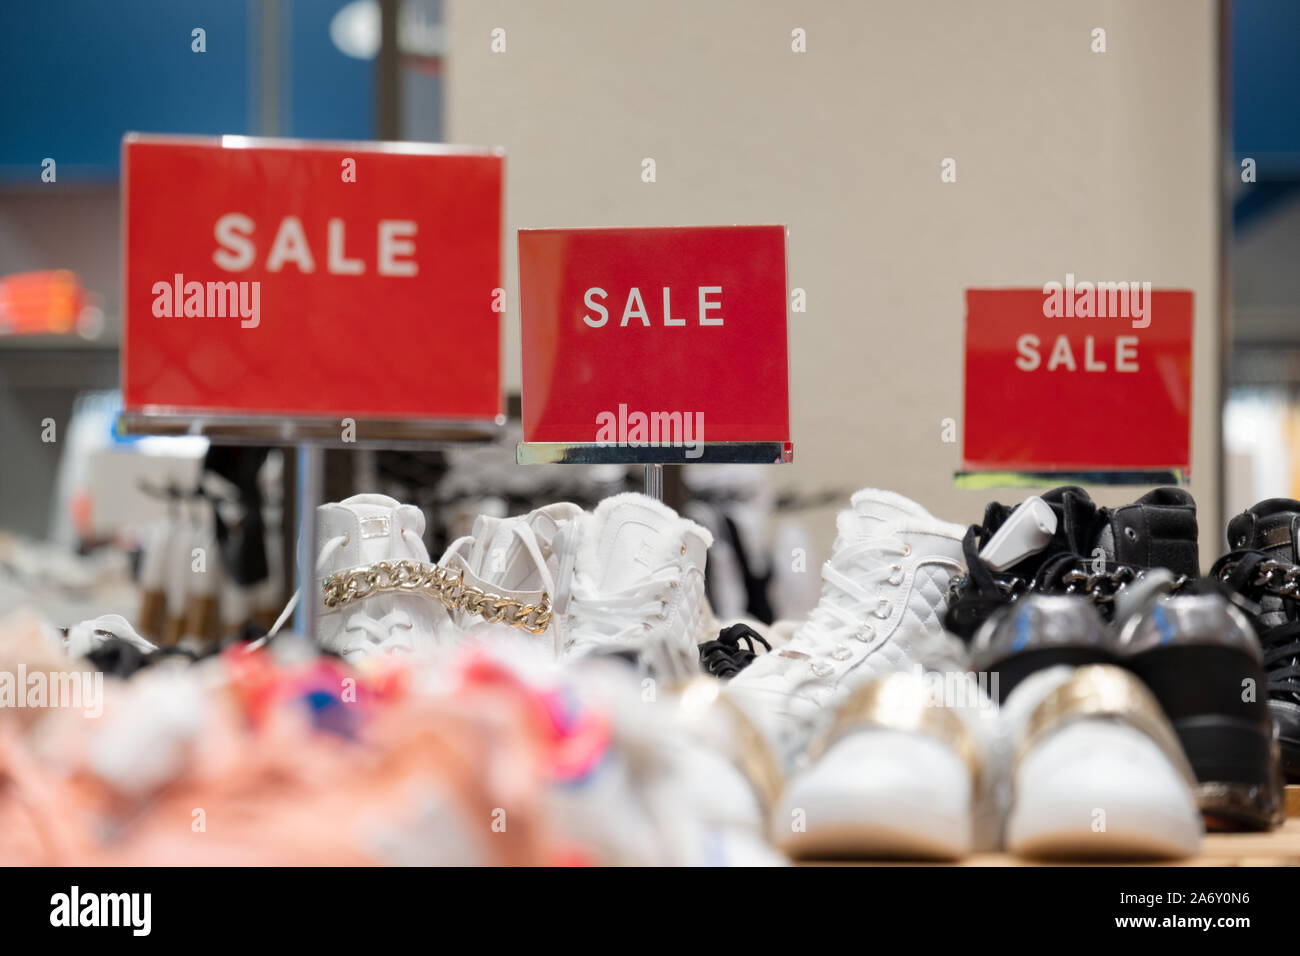 signs advertising sale of shoes at reduced price Stock Photo